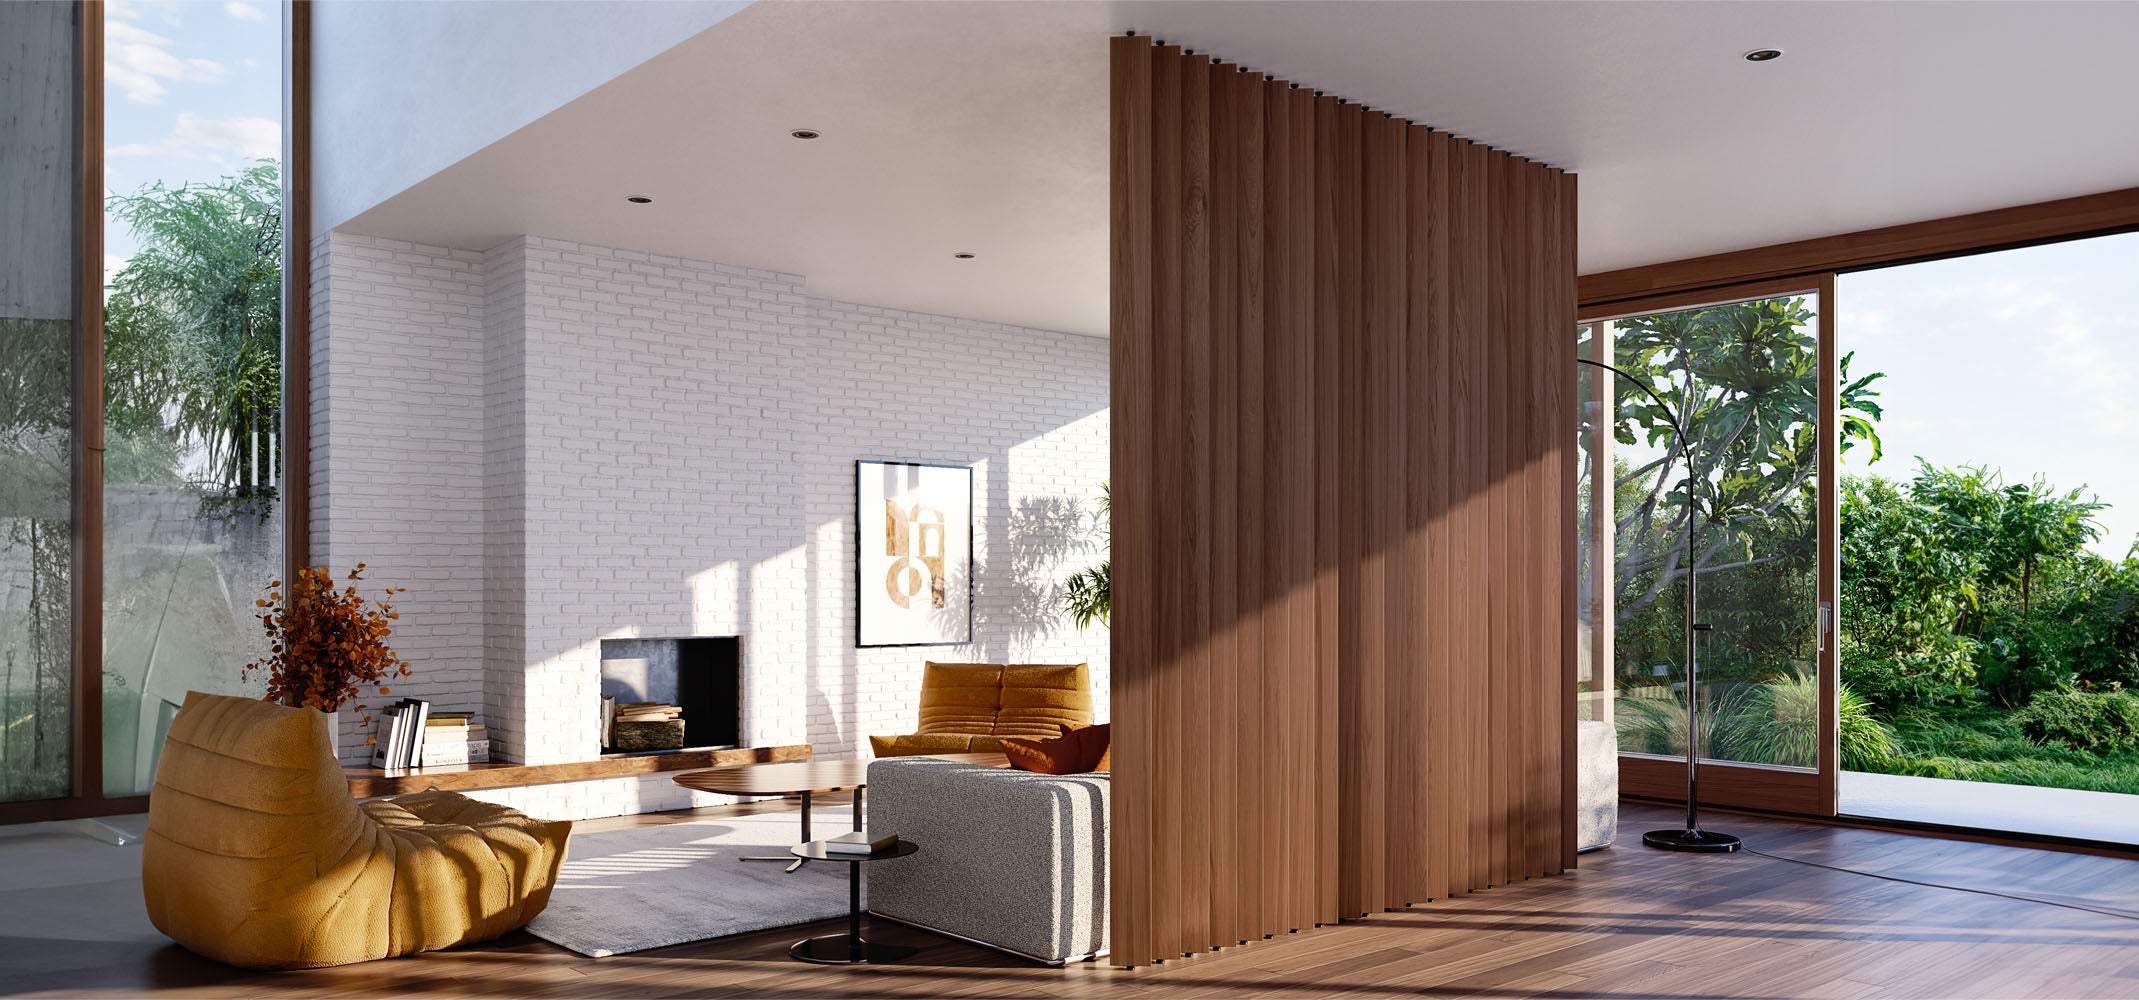 A bright room divided by a striking walnut wood slat partition, with a cosy seating area, modern fireplace, and a verdant outdoor view through floor-to-ceiling windows.